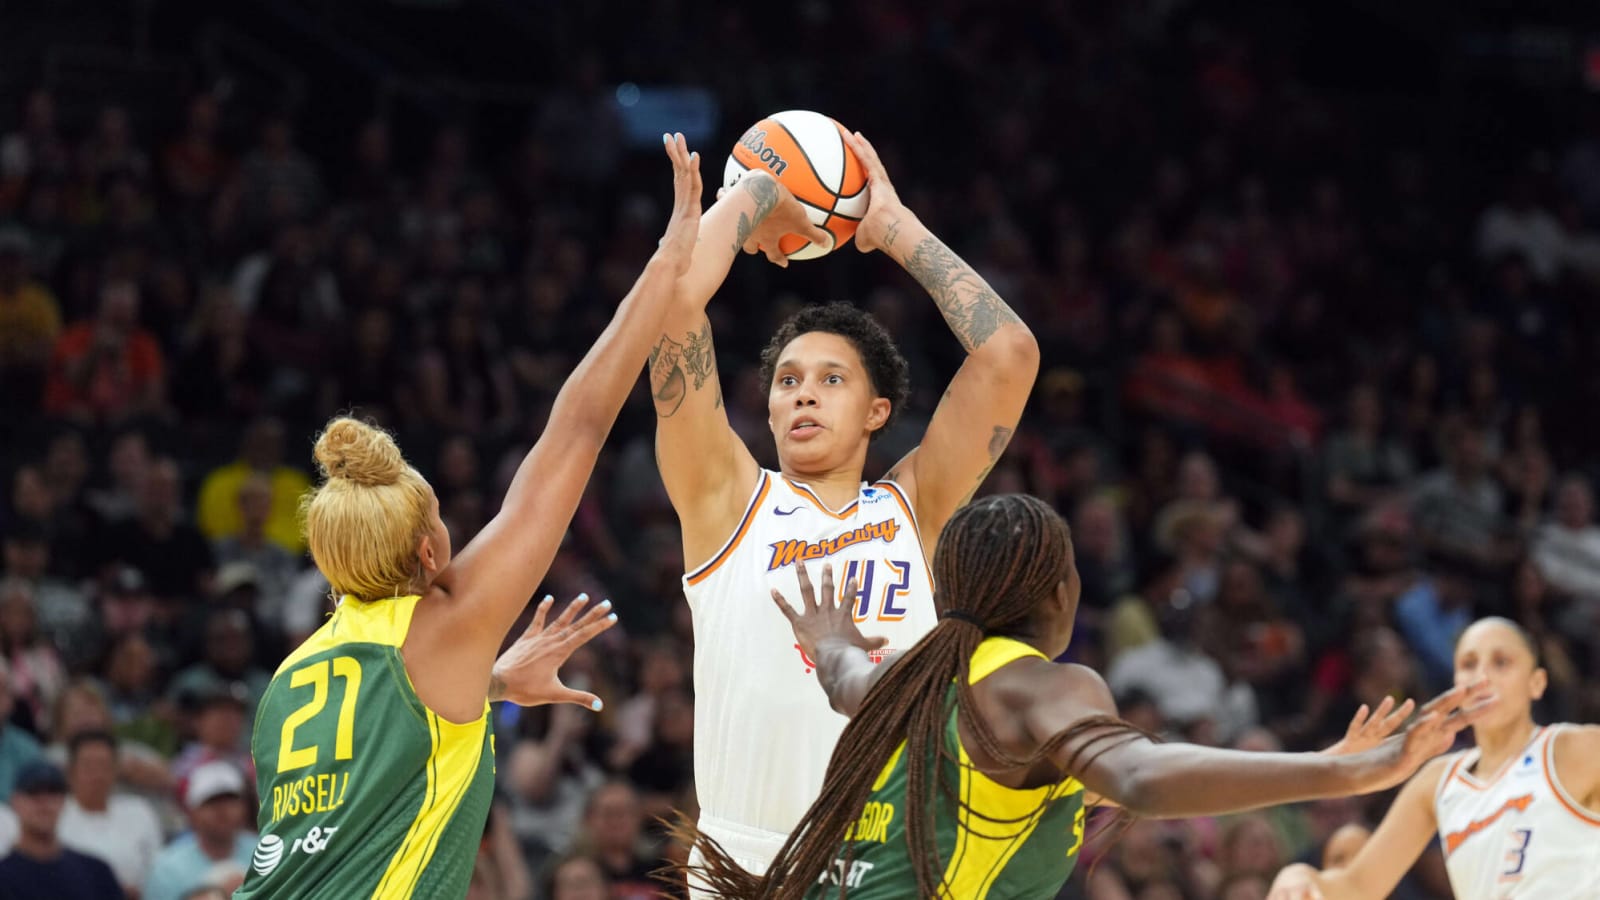 Mercury coach Nate Tibbetts highlights how team will adapt without Brittney Griner